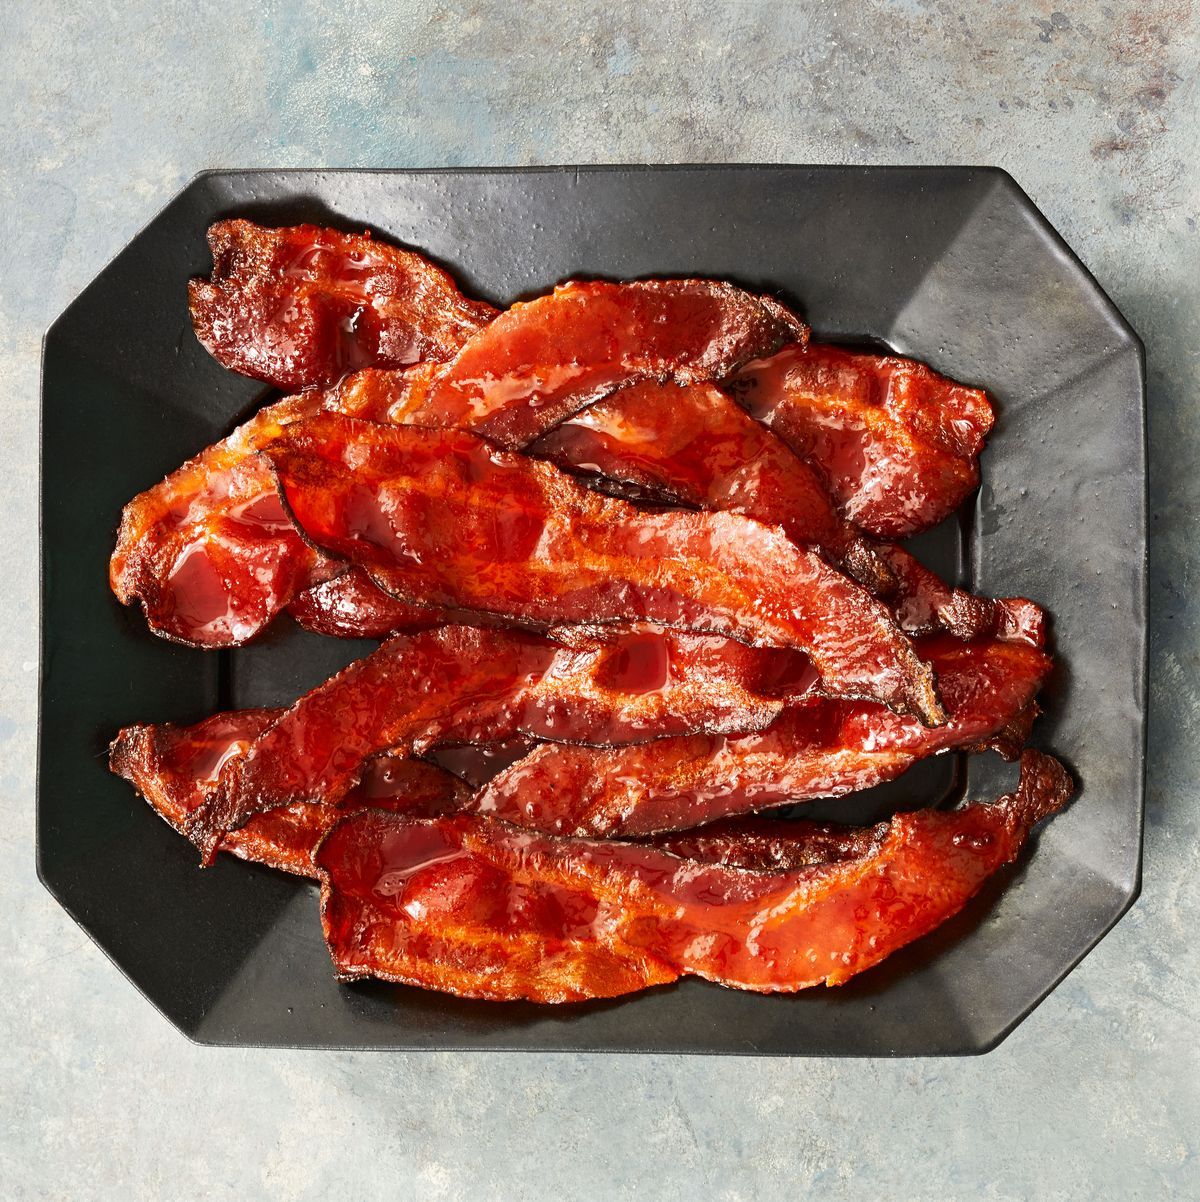 How to Cook Bacon in the Oven - Mess-Free!